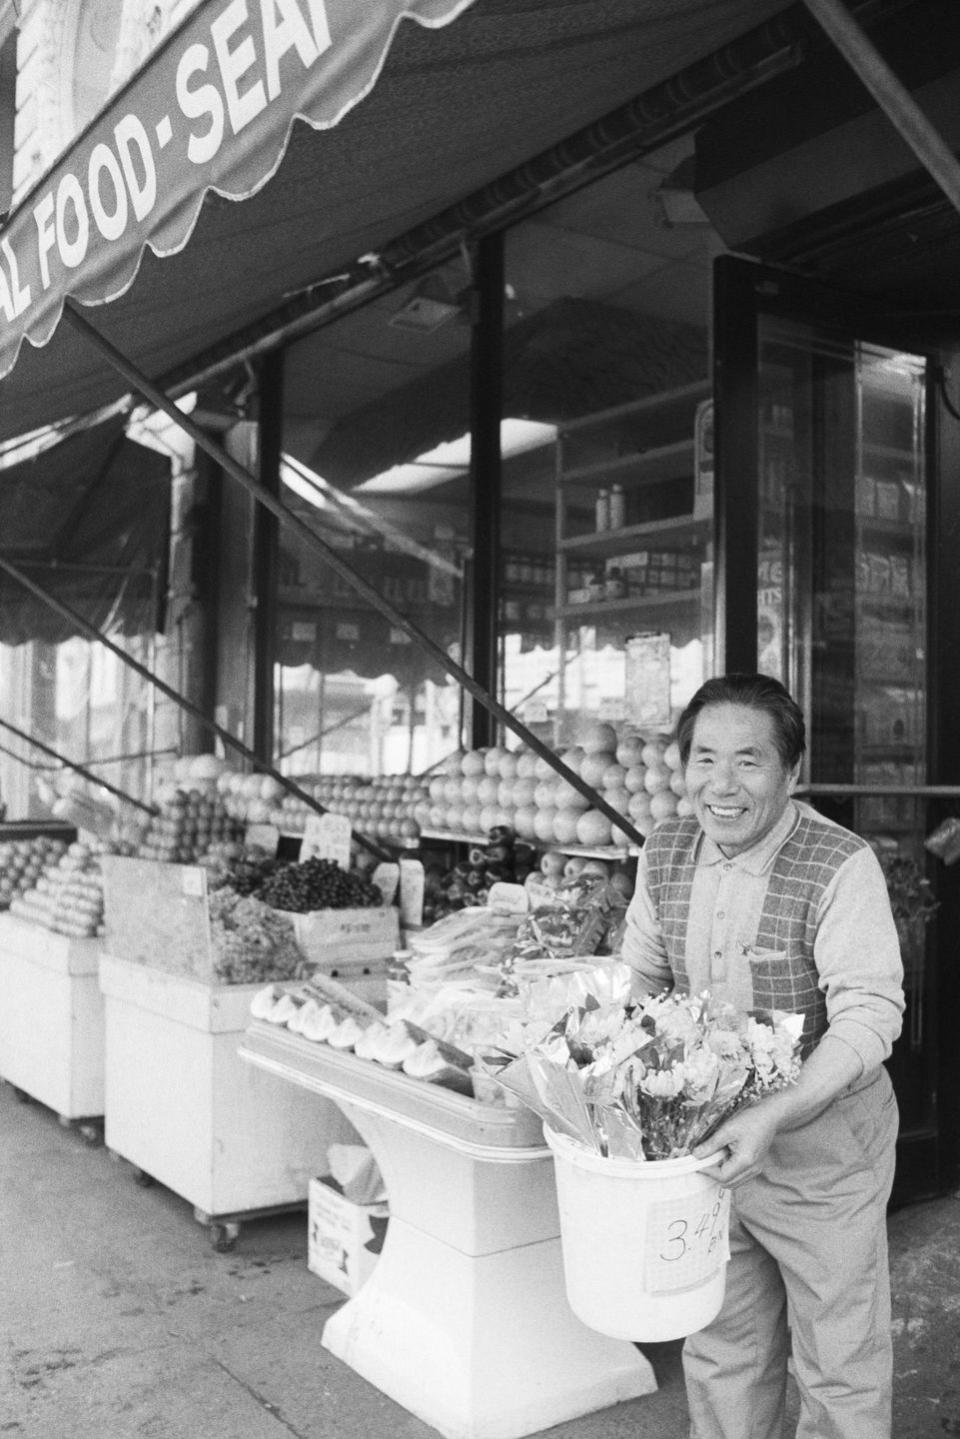 1985: The Manhattan Grocery Store